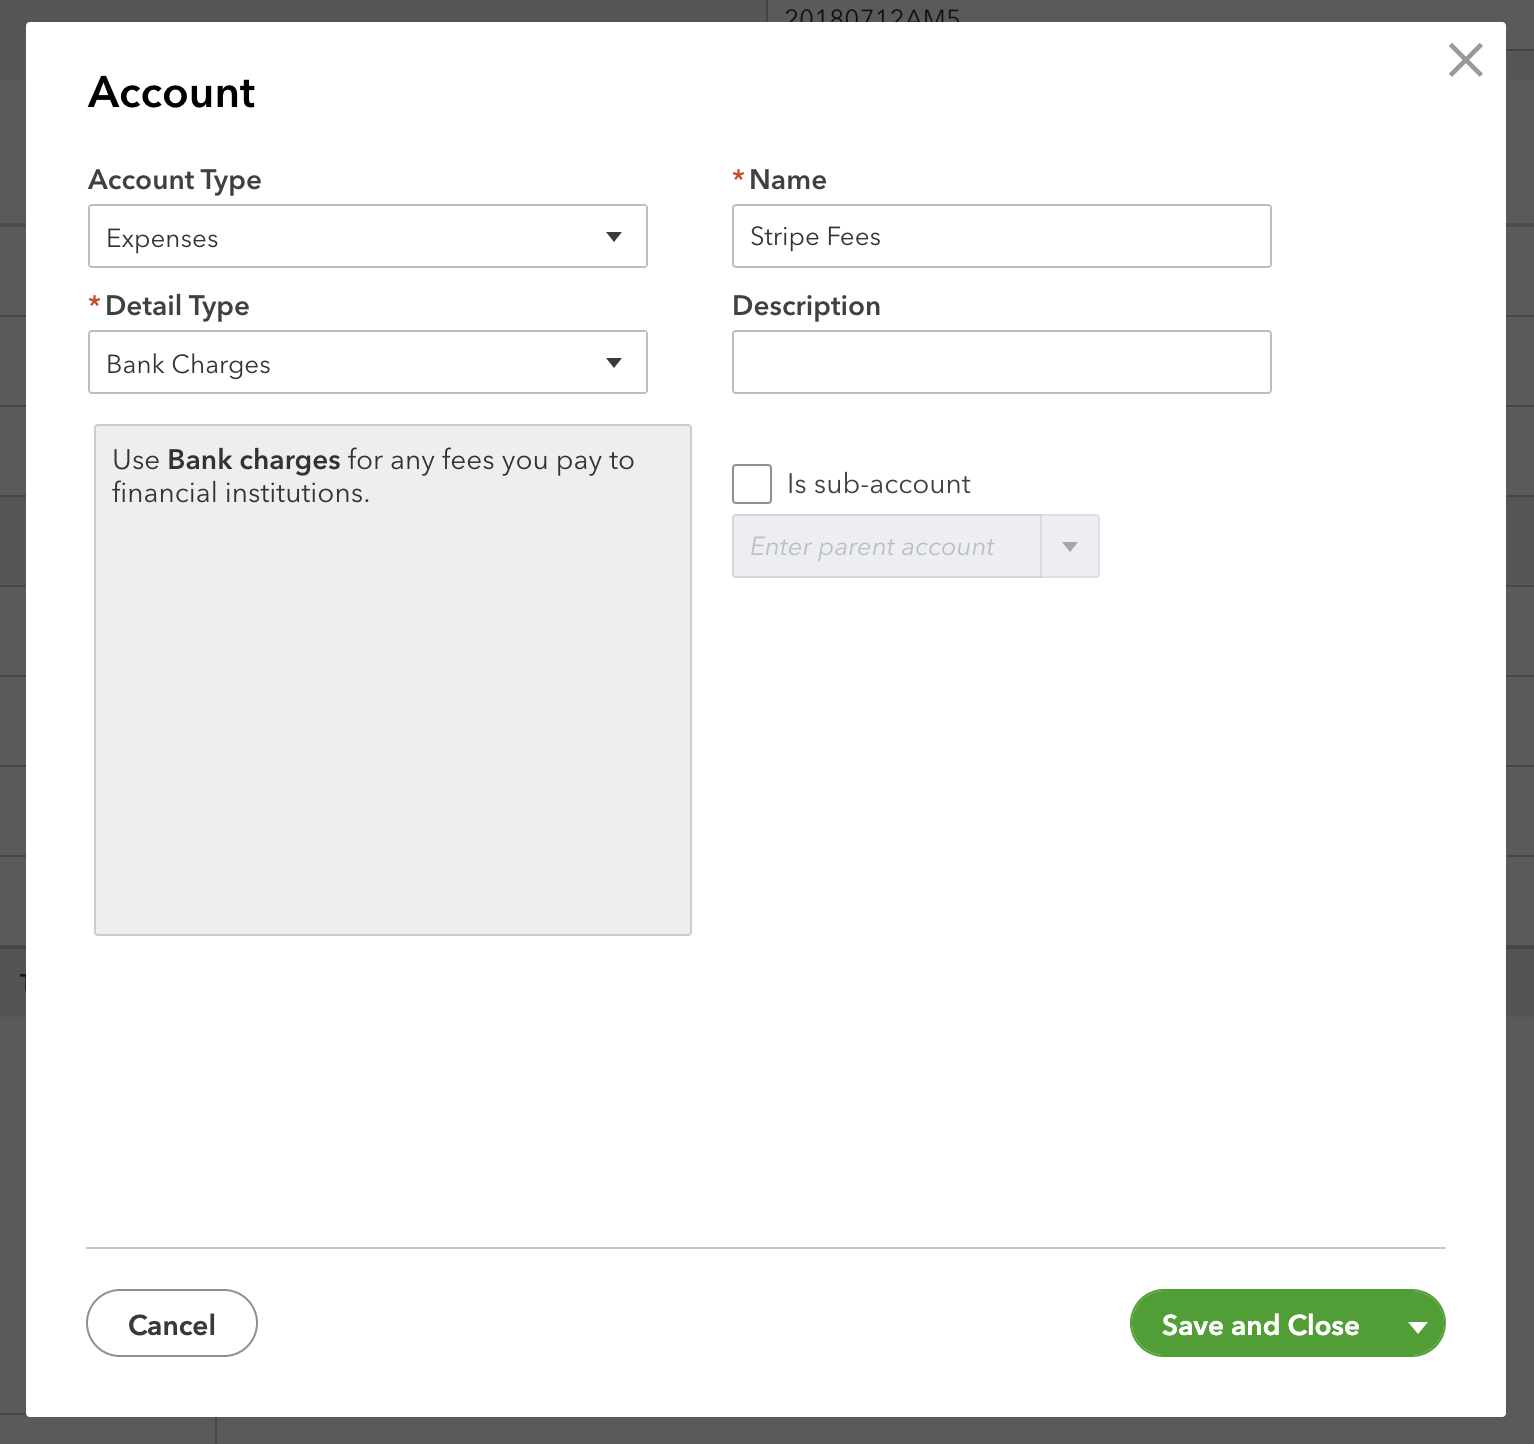 Create expense account for Stripe Fees